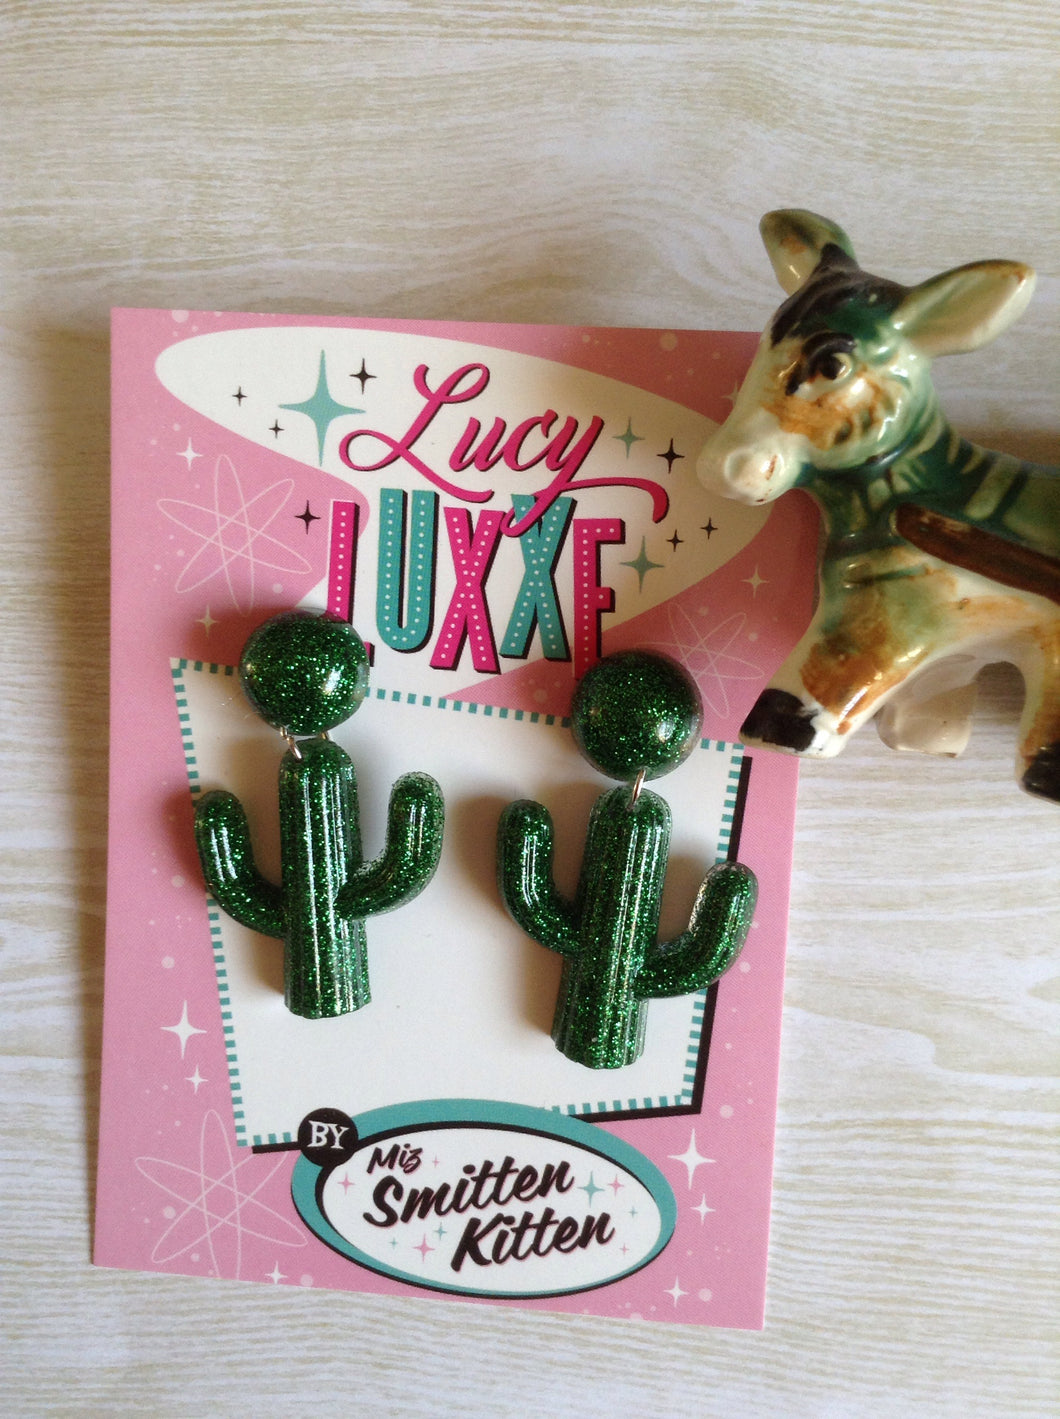 SOUTH OF THE BORDER - cactus 🌵earrings - green